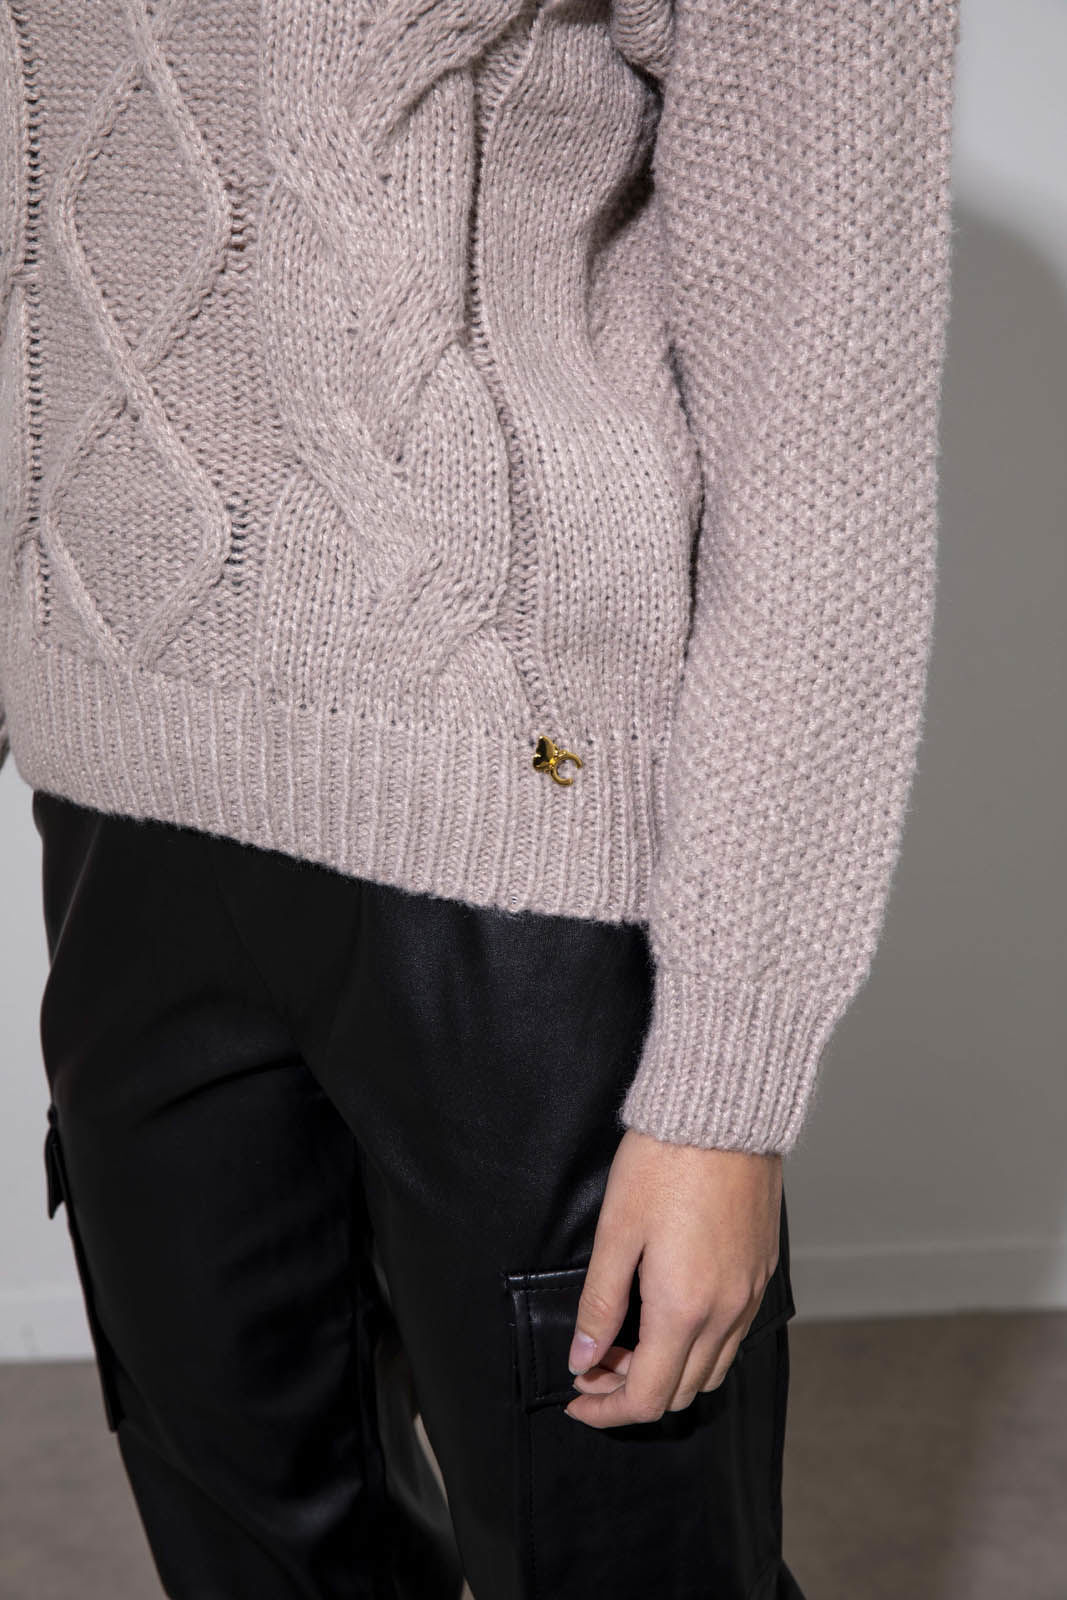 Picture of Sweater with knit pattern